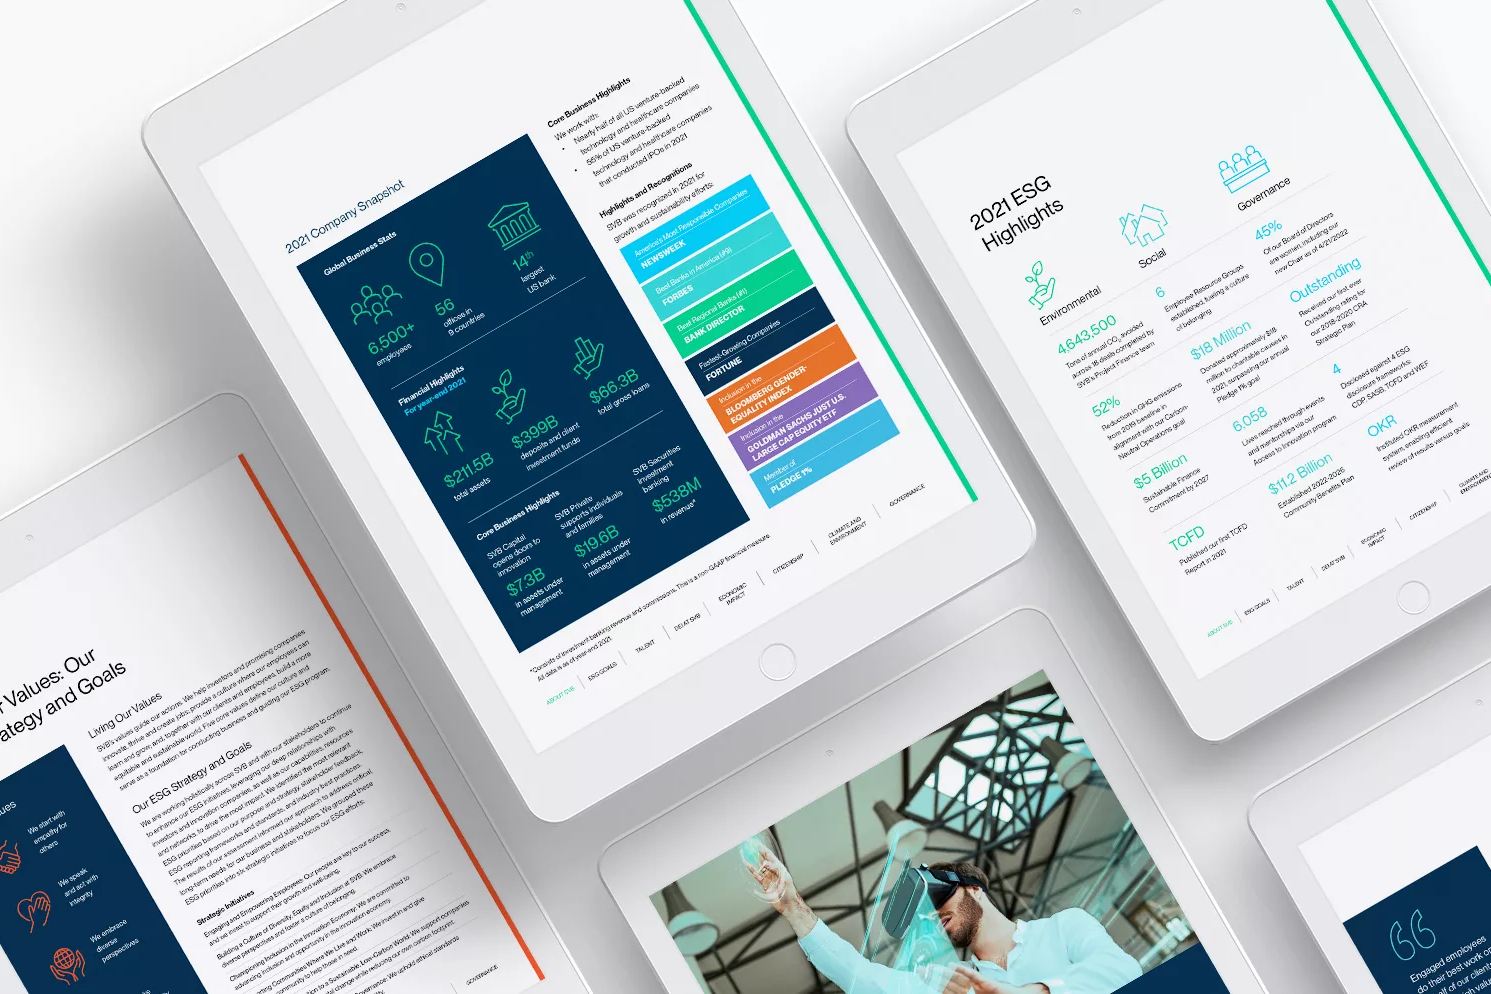 Why choose JDJ Creative to design your Sustainability Report?